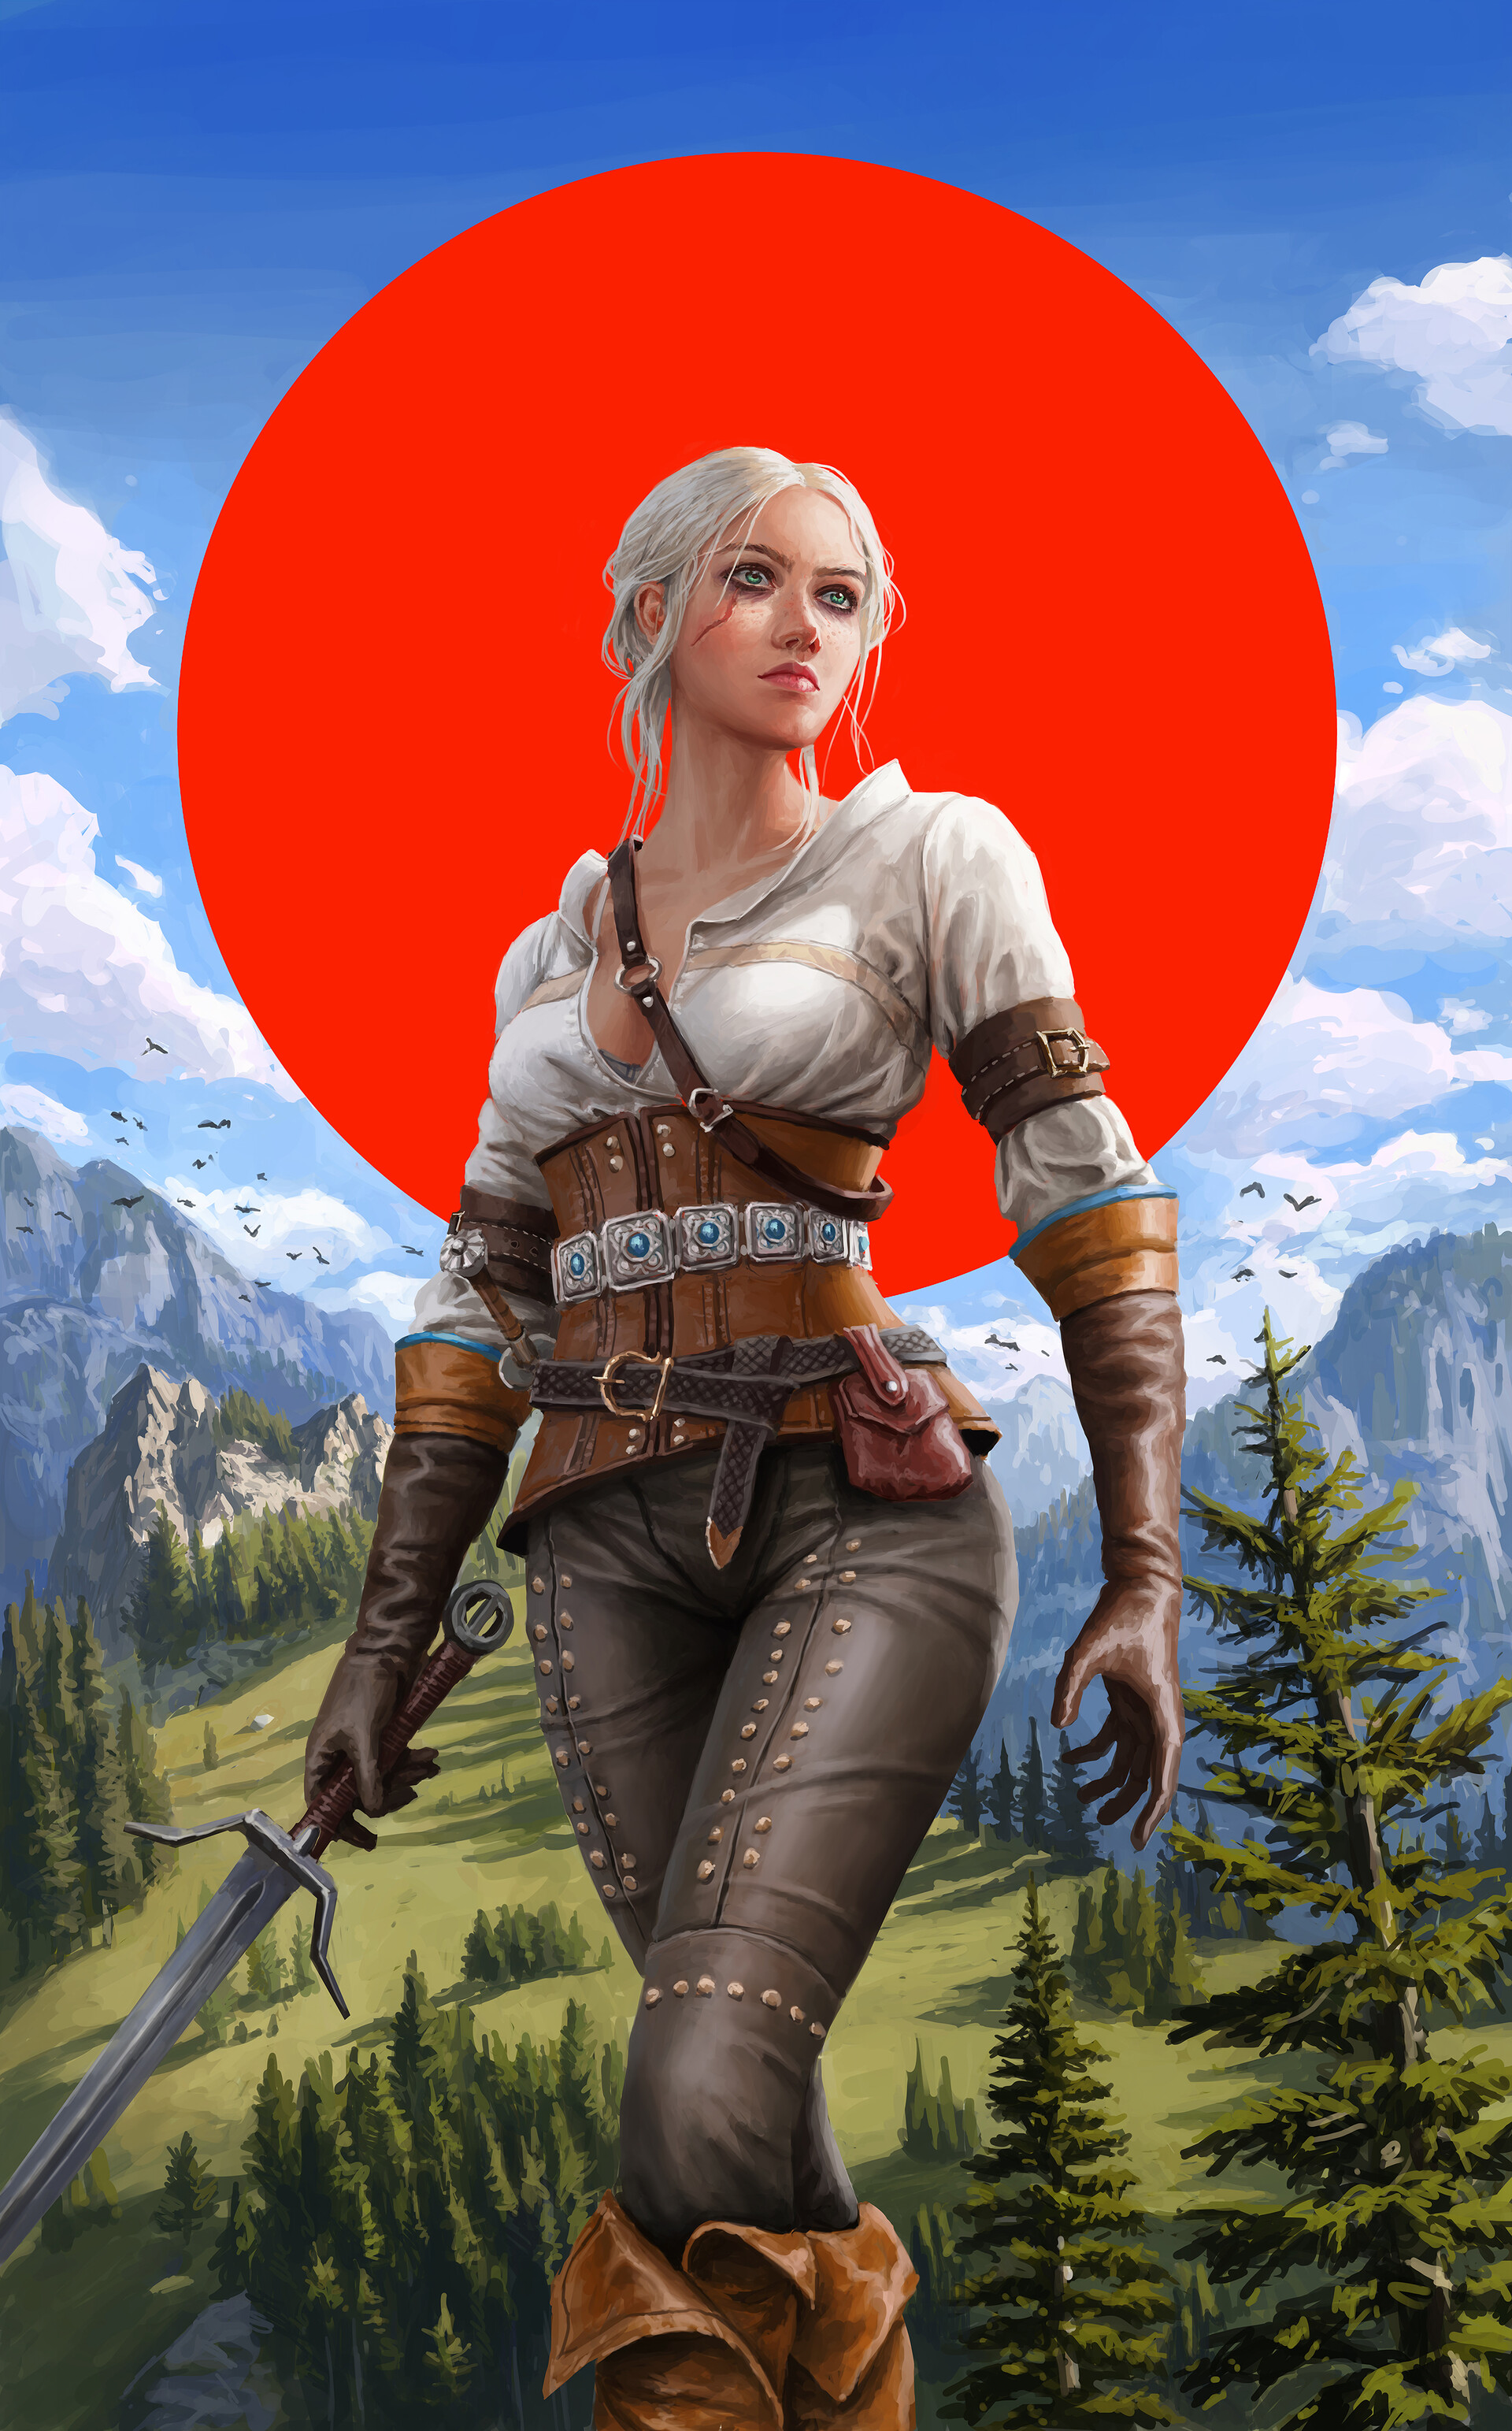 General 1920x3086 ArtStation portrait display CD Projekt RED video games digital art The Witcher 3: Wild Hunt red white hair leather clothing blonde video game art artwork video game characters Cirilla Fiona Elen Riannon green eyes eye scar white shirt looking away portrait video game girls fan art